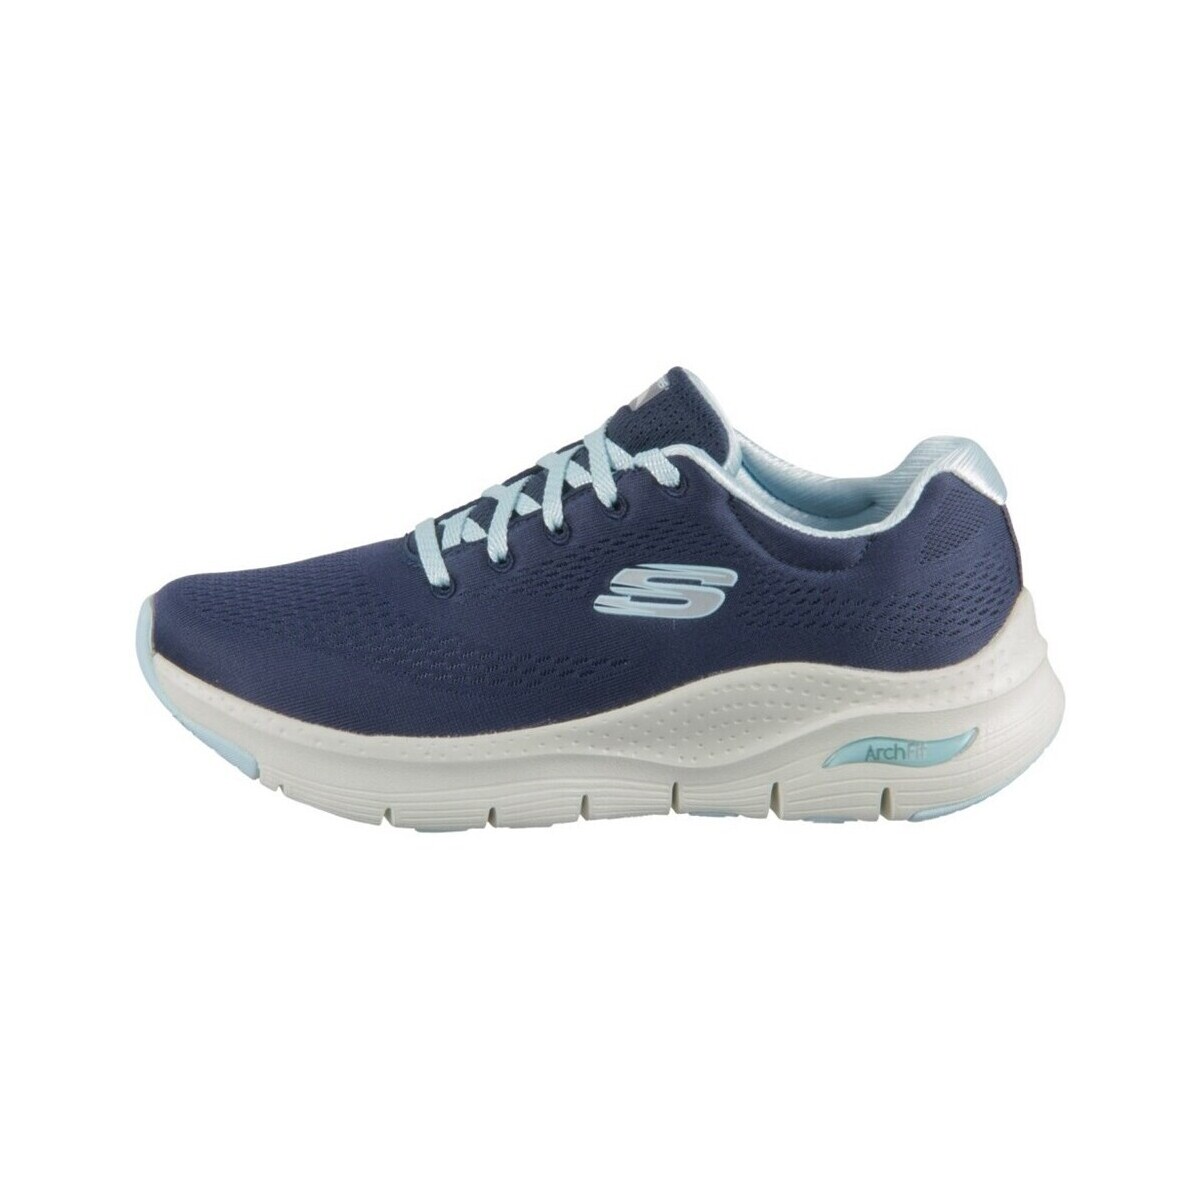 Chaussures Femme Skechers lace up sneakers in white with green sole Arch Fit Big Appeal Marine